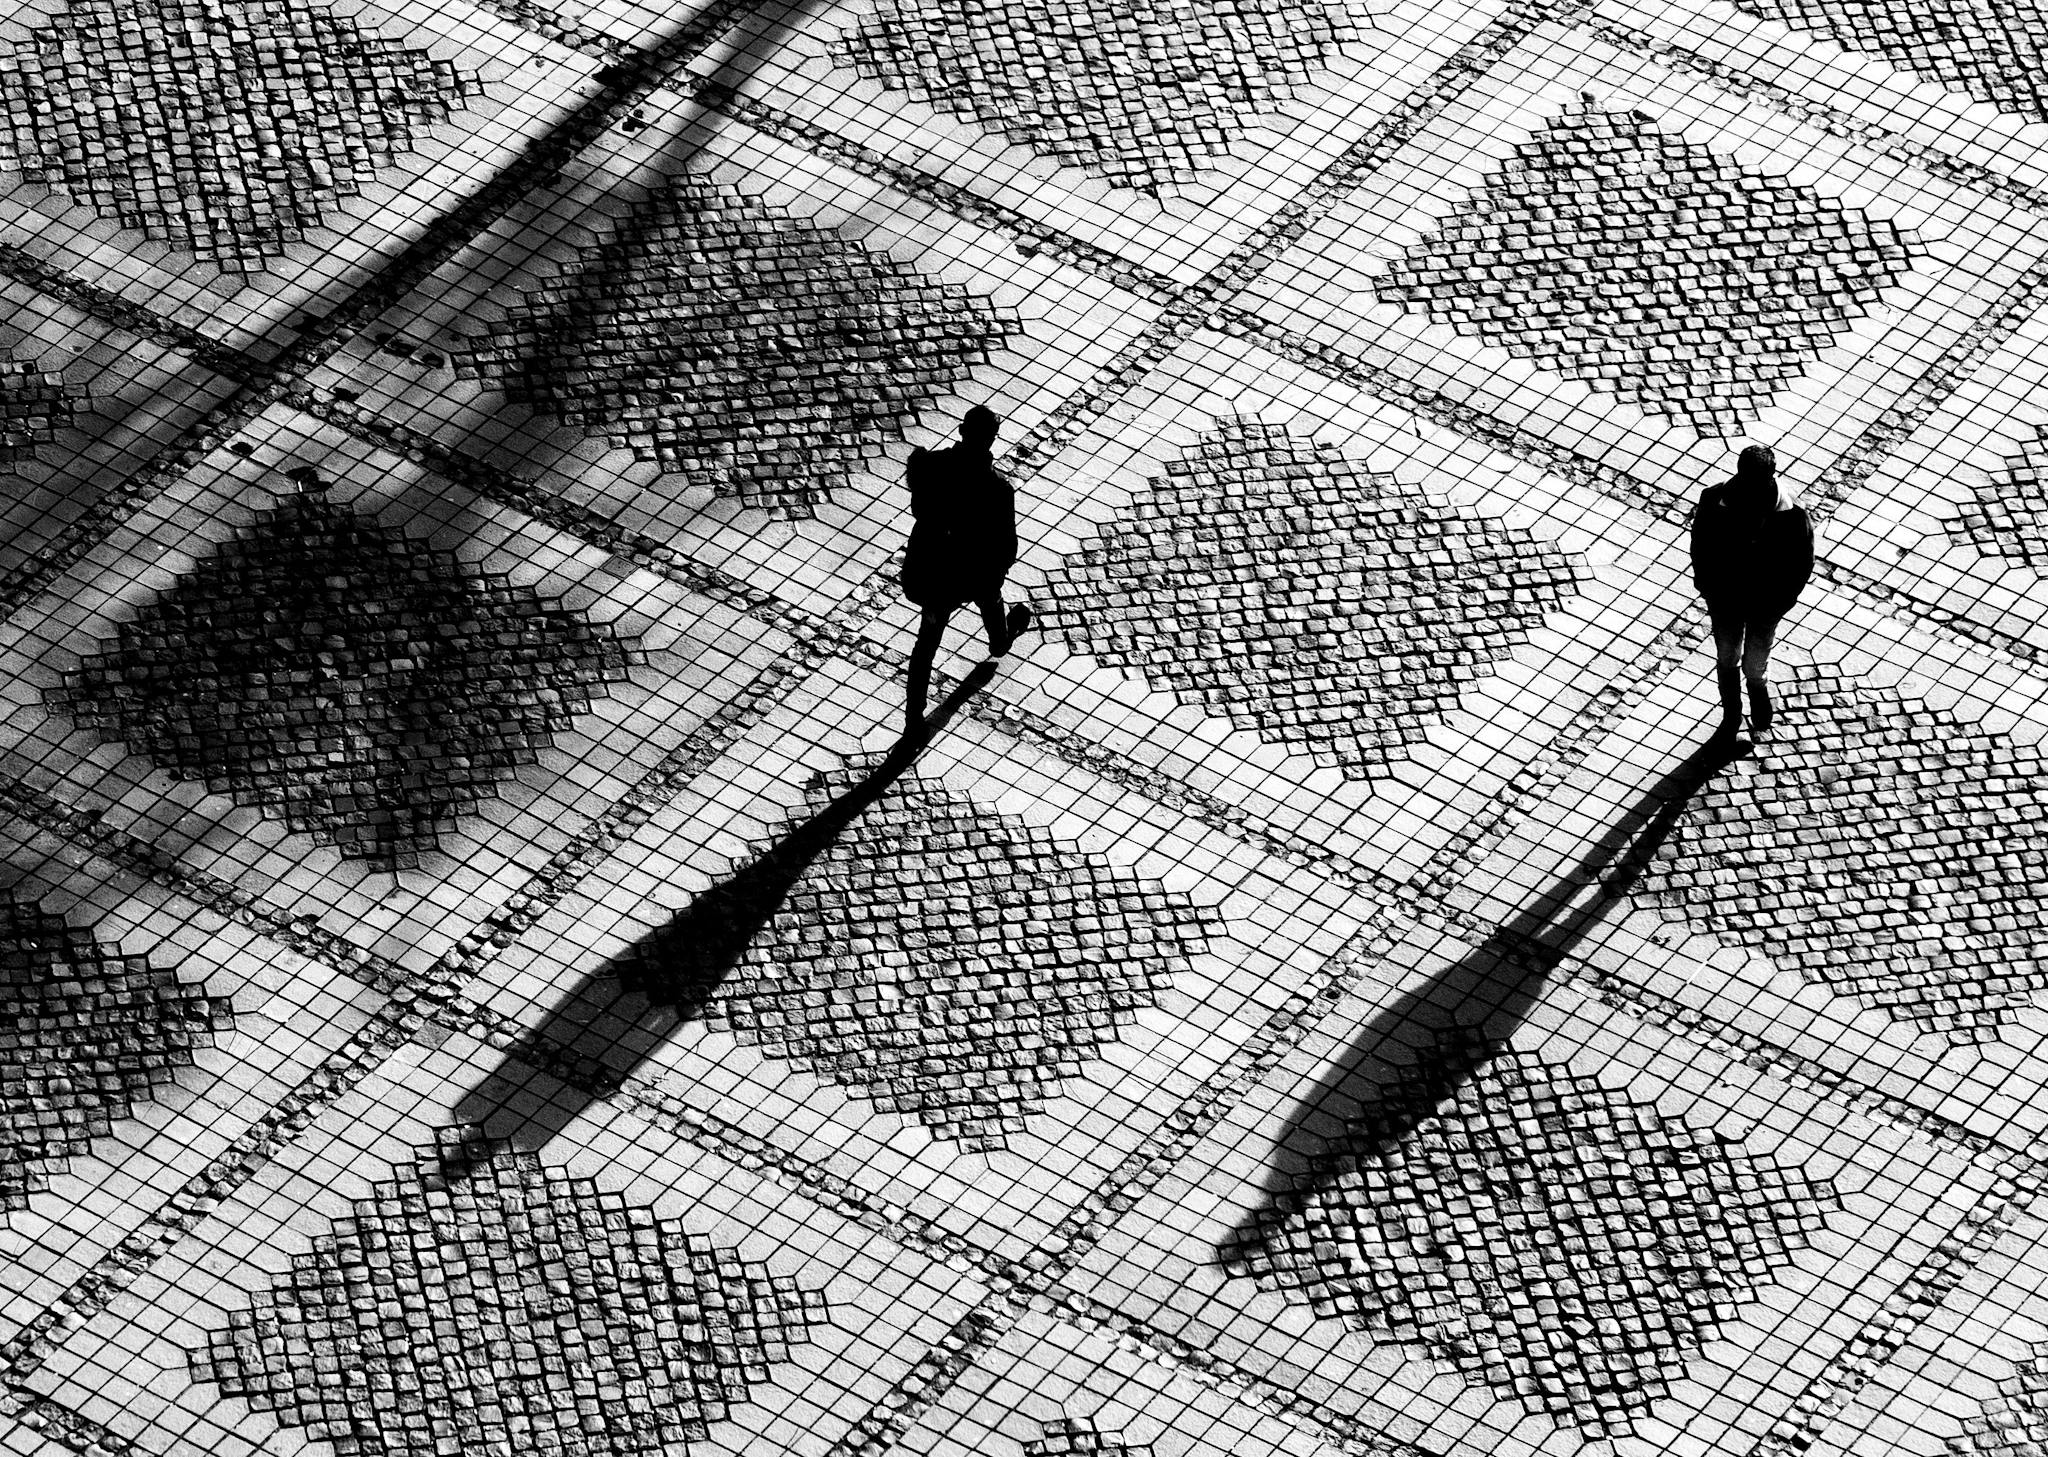 black and white birds eye view of two people walking past each other on outdoor tiled path